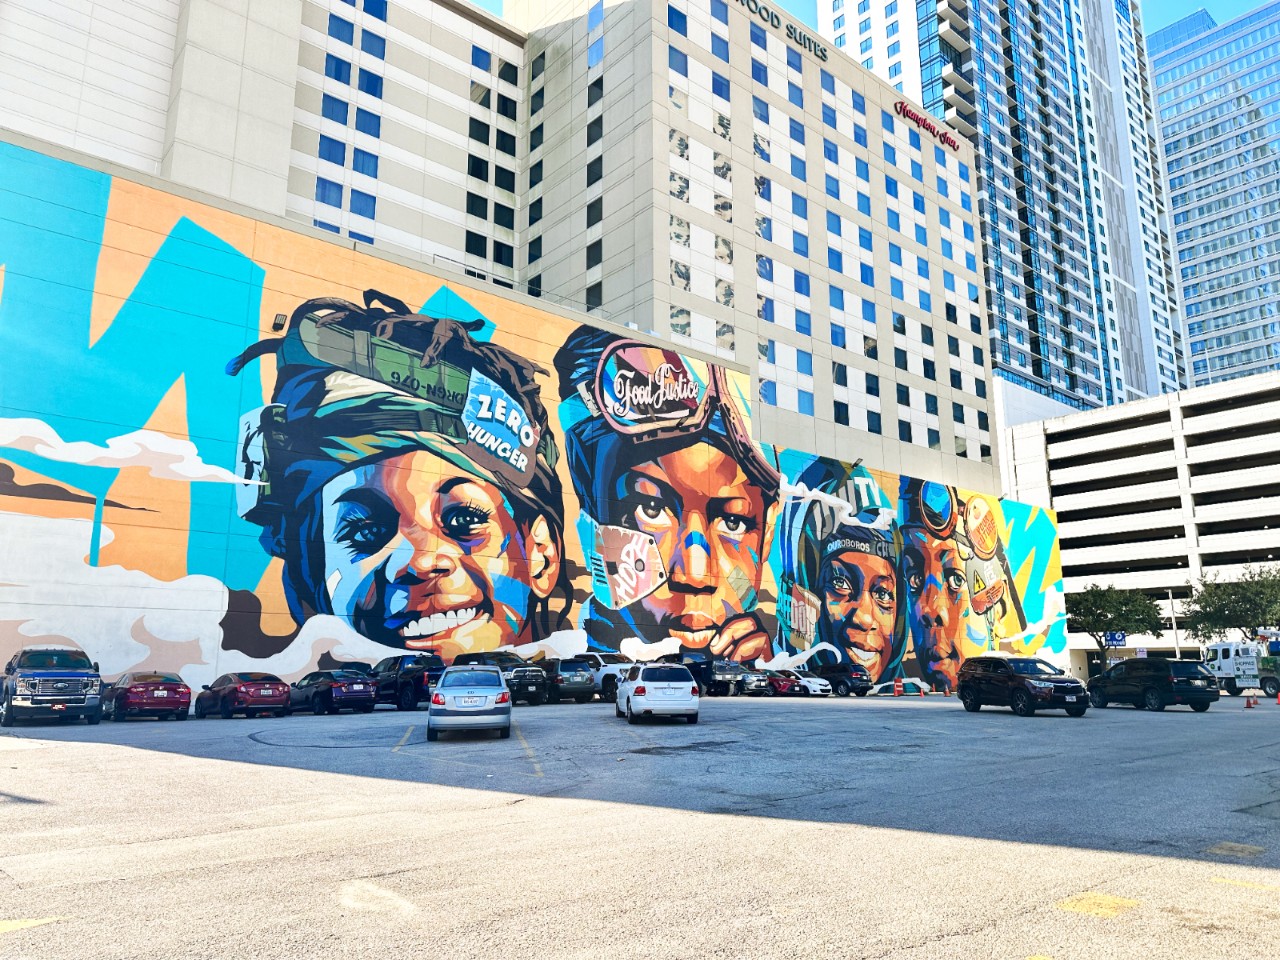 A mural in downtown Houston, TX shows closeup images of four smiling Black kids.